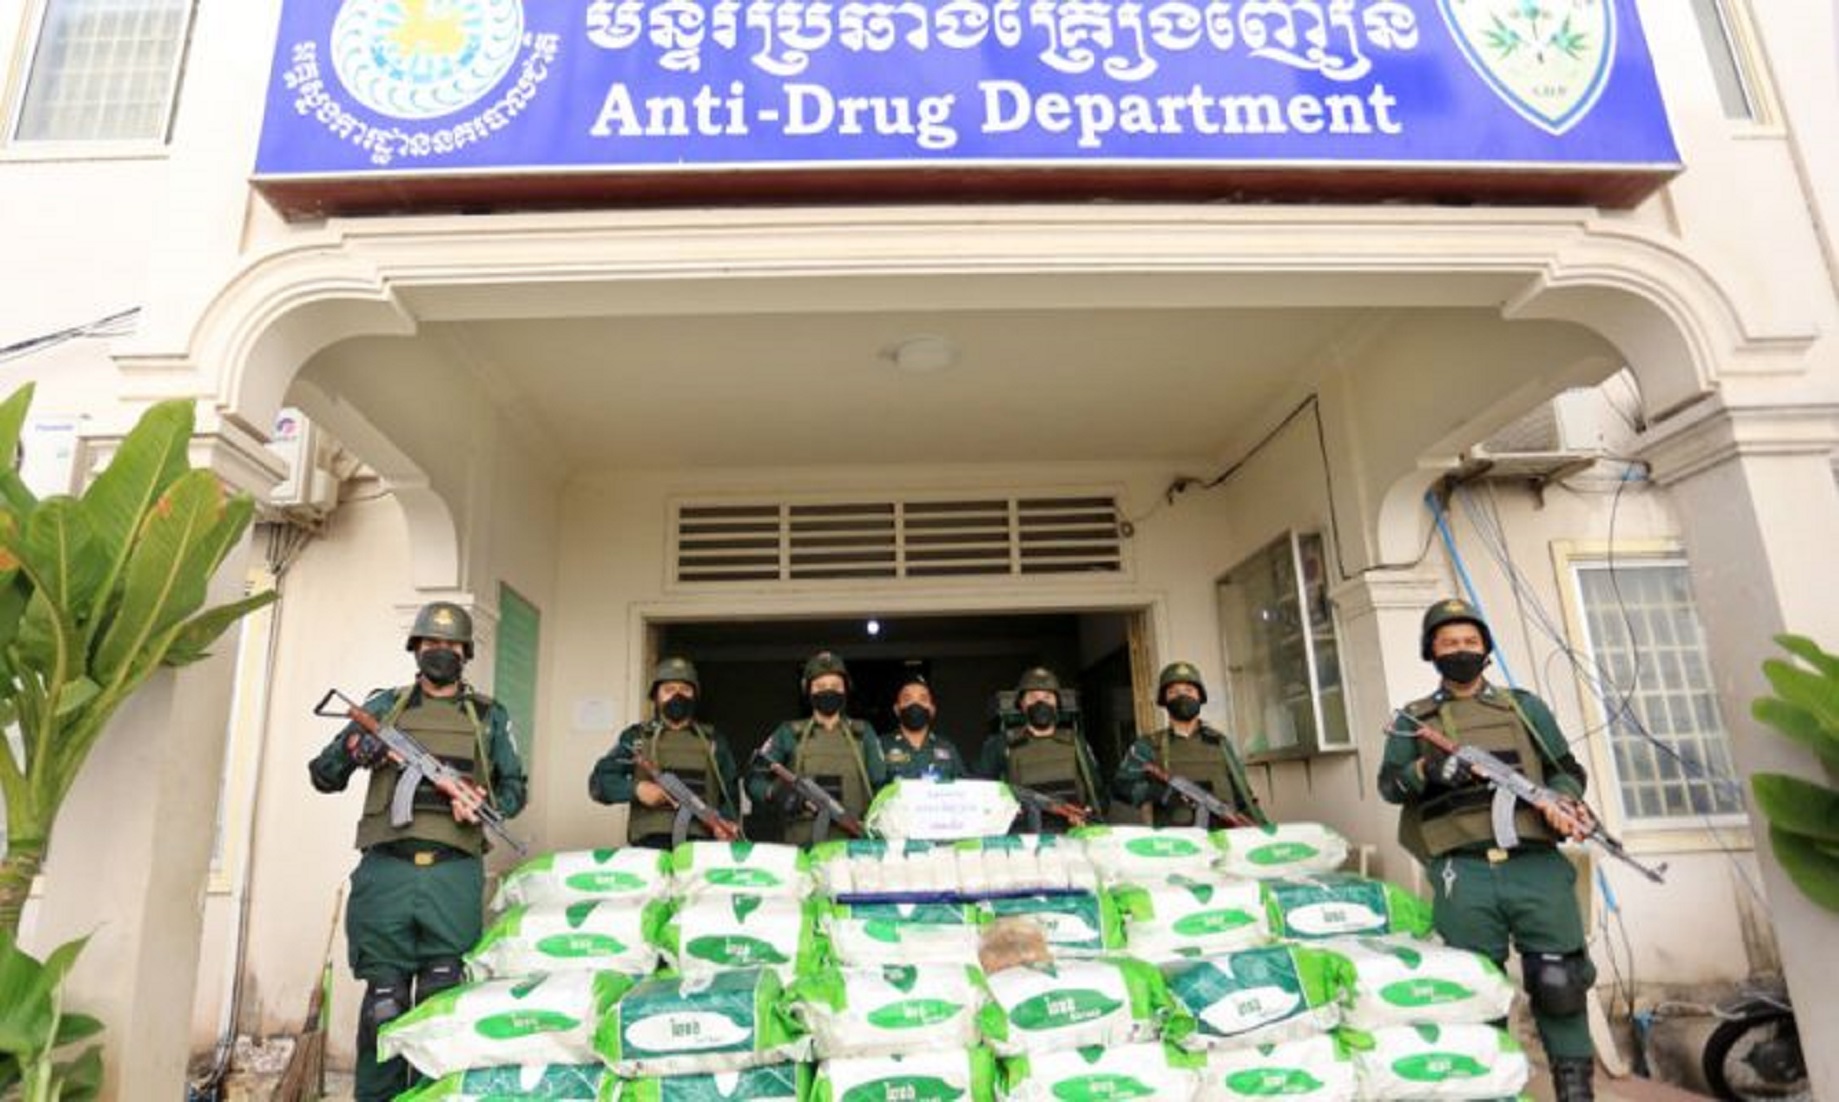 Cambodia Arrests Four Foreigners Over Illicit Drugs